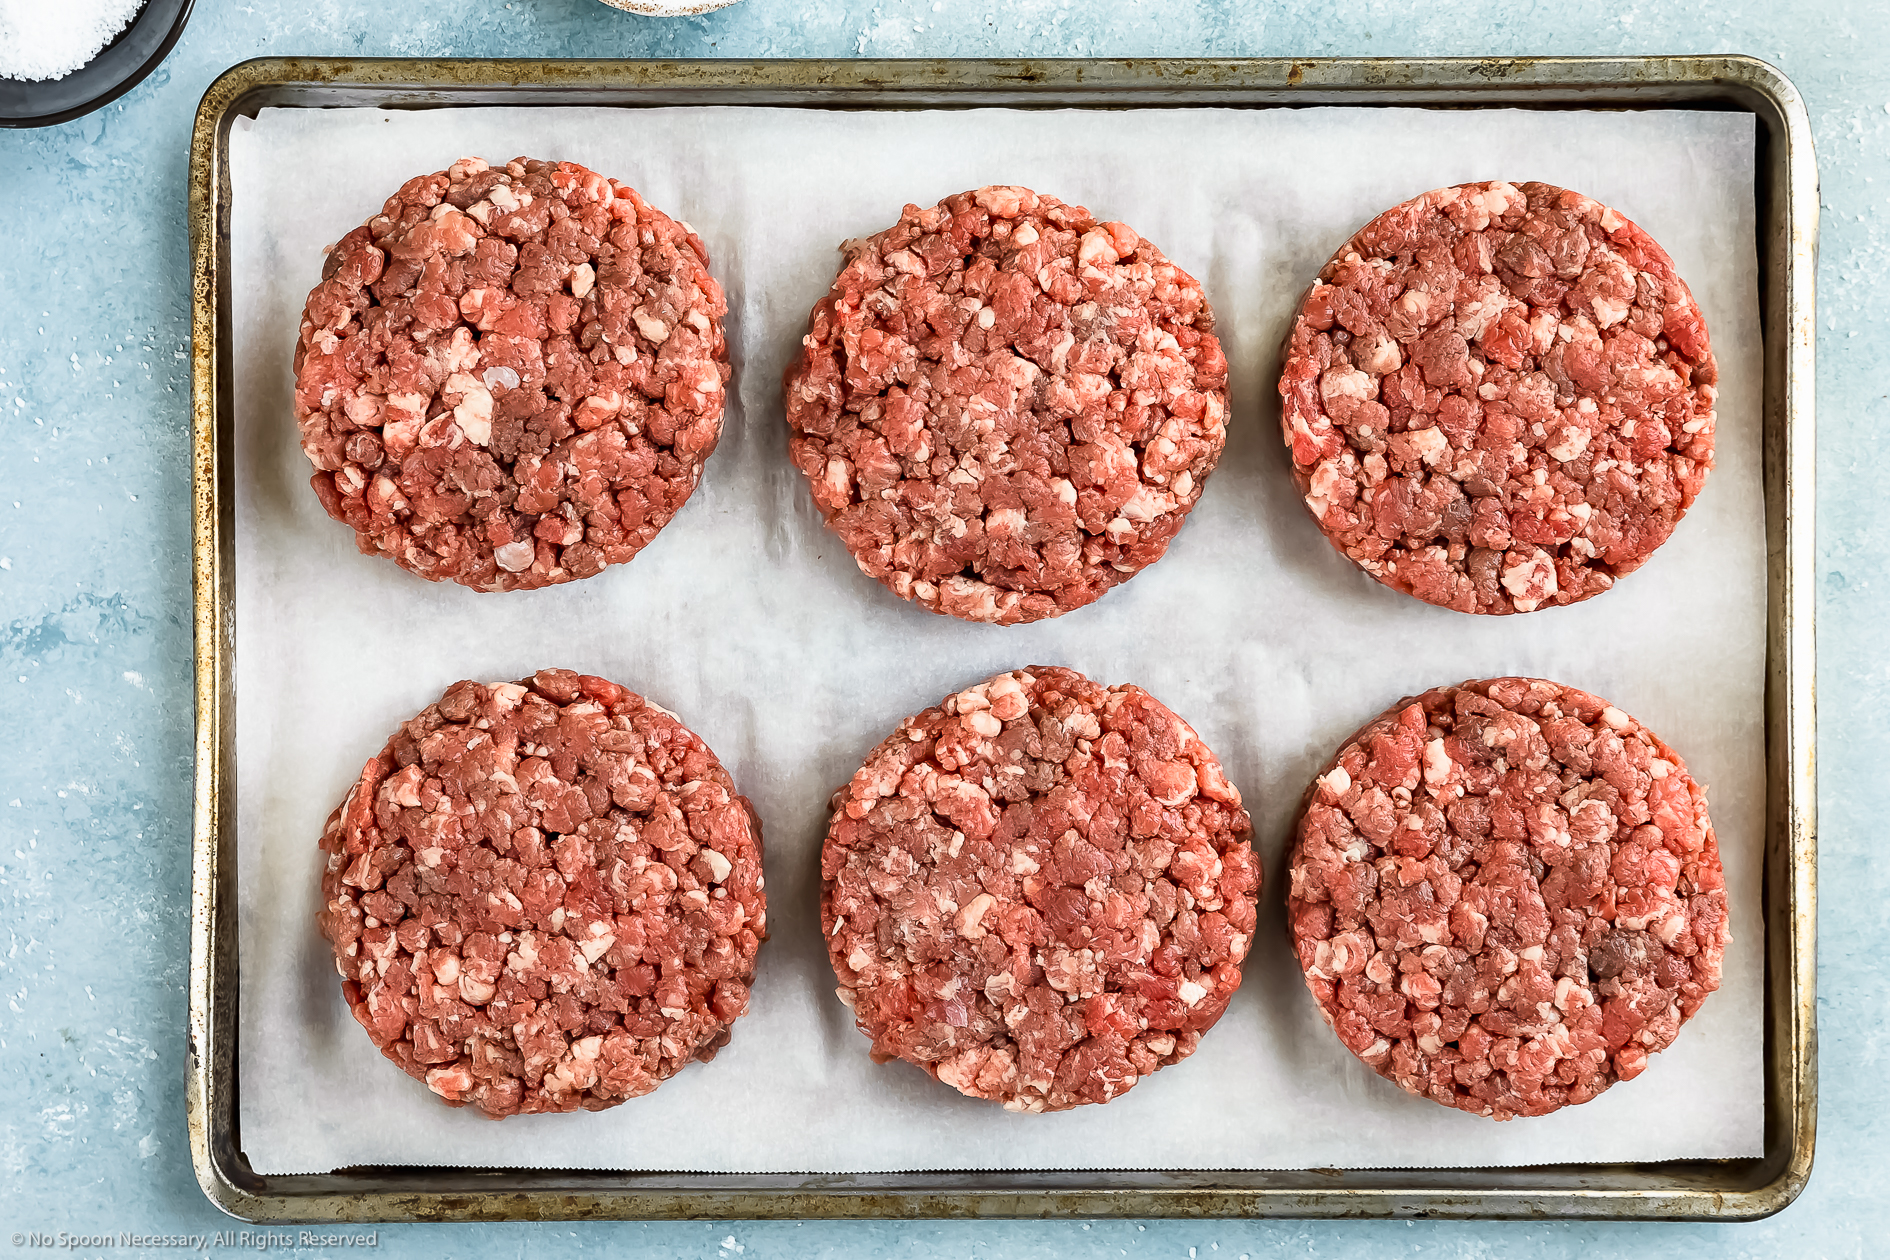 How to Grind Meat at Home (for burgers, meatballs more!)